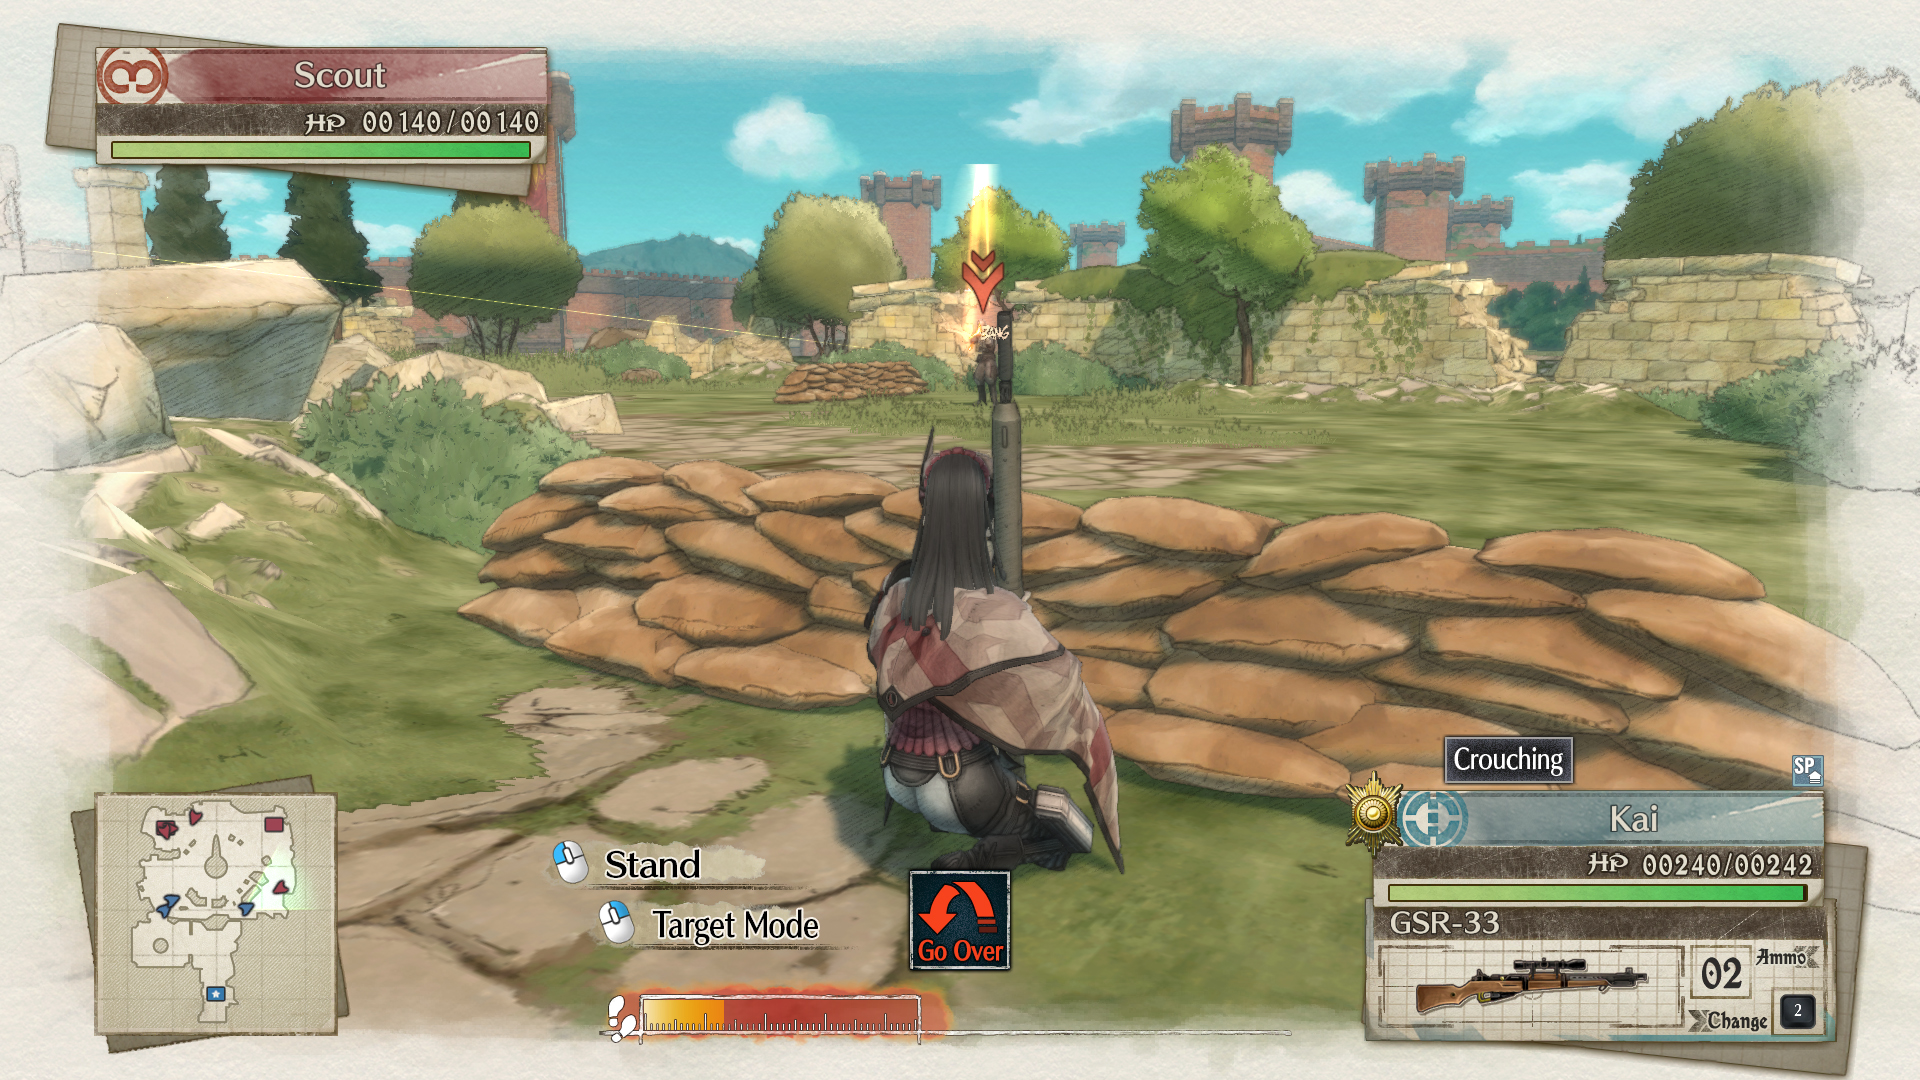 Best turn-based RPGs: Valkyria Chronicles 3. Image shows a girl crouches in front of some sandbags, rifle raised, with an enemy ahead.